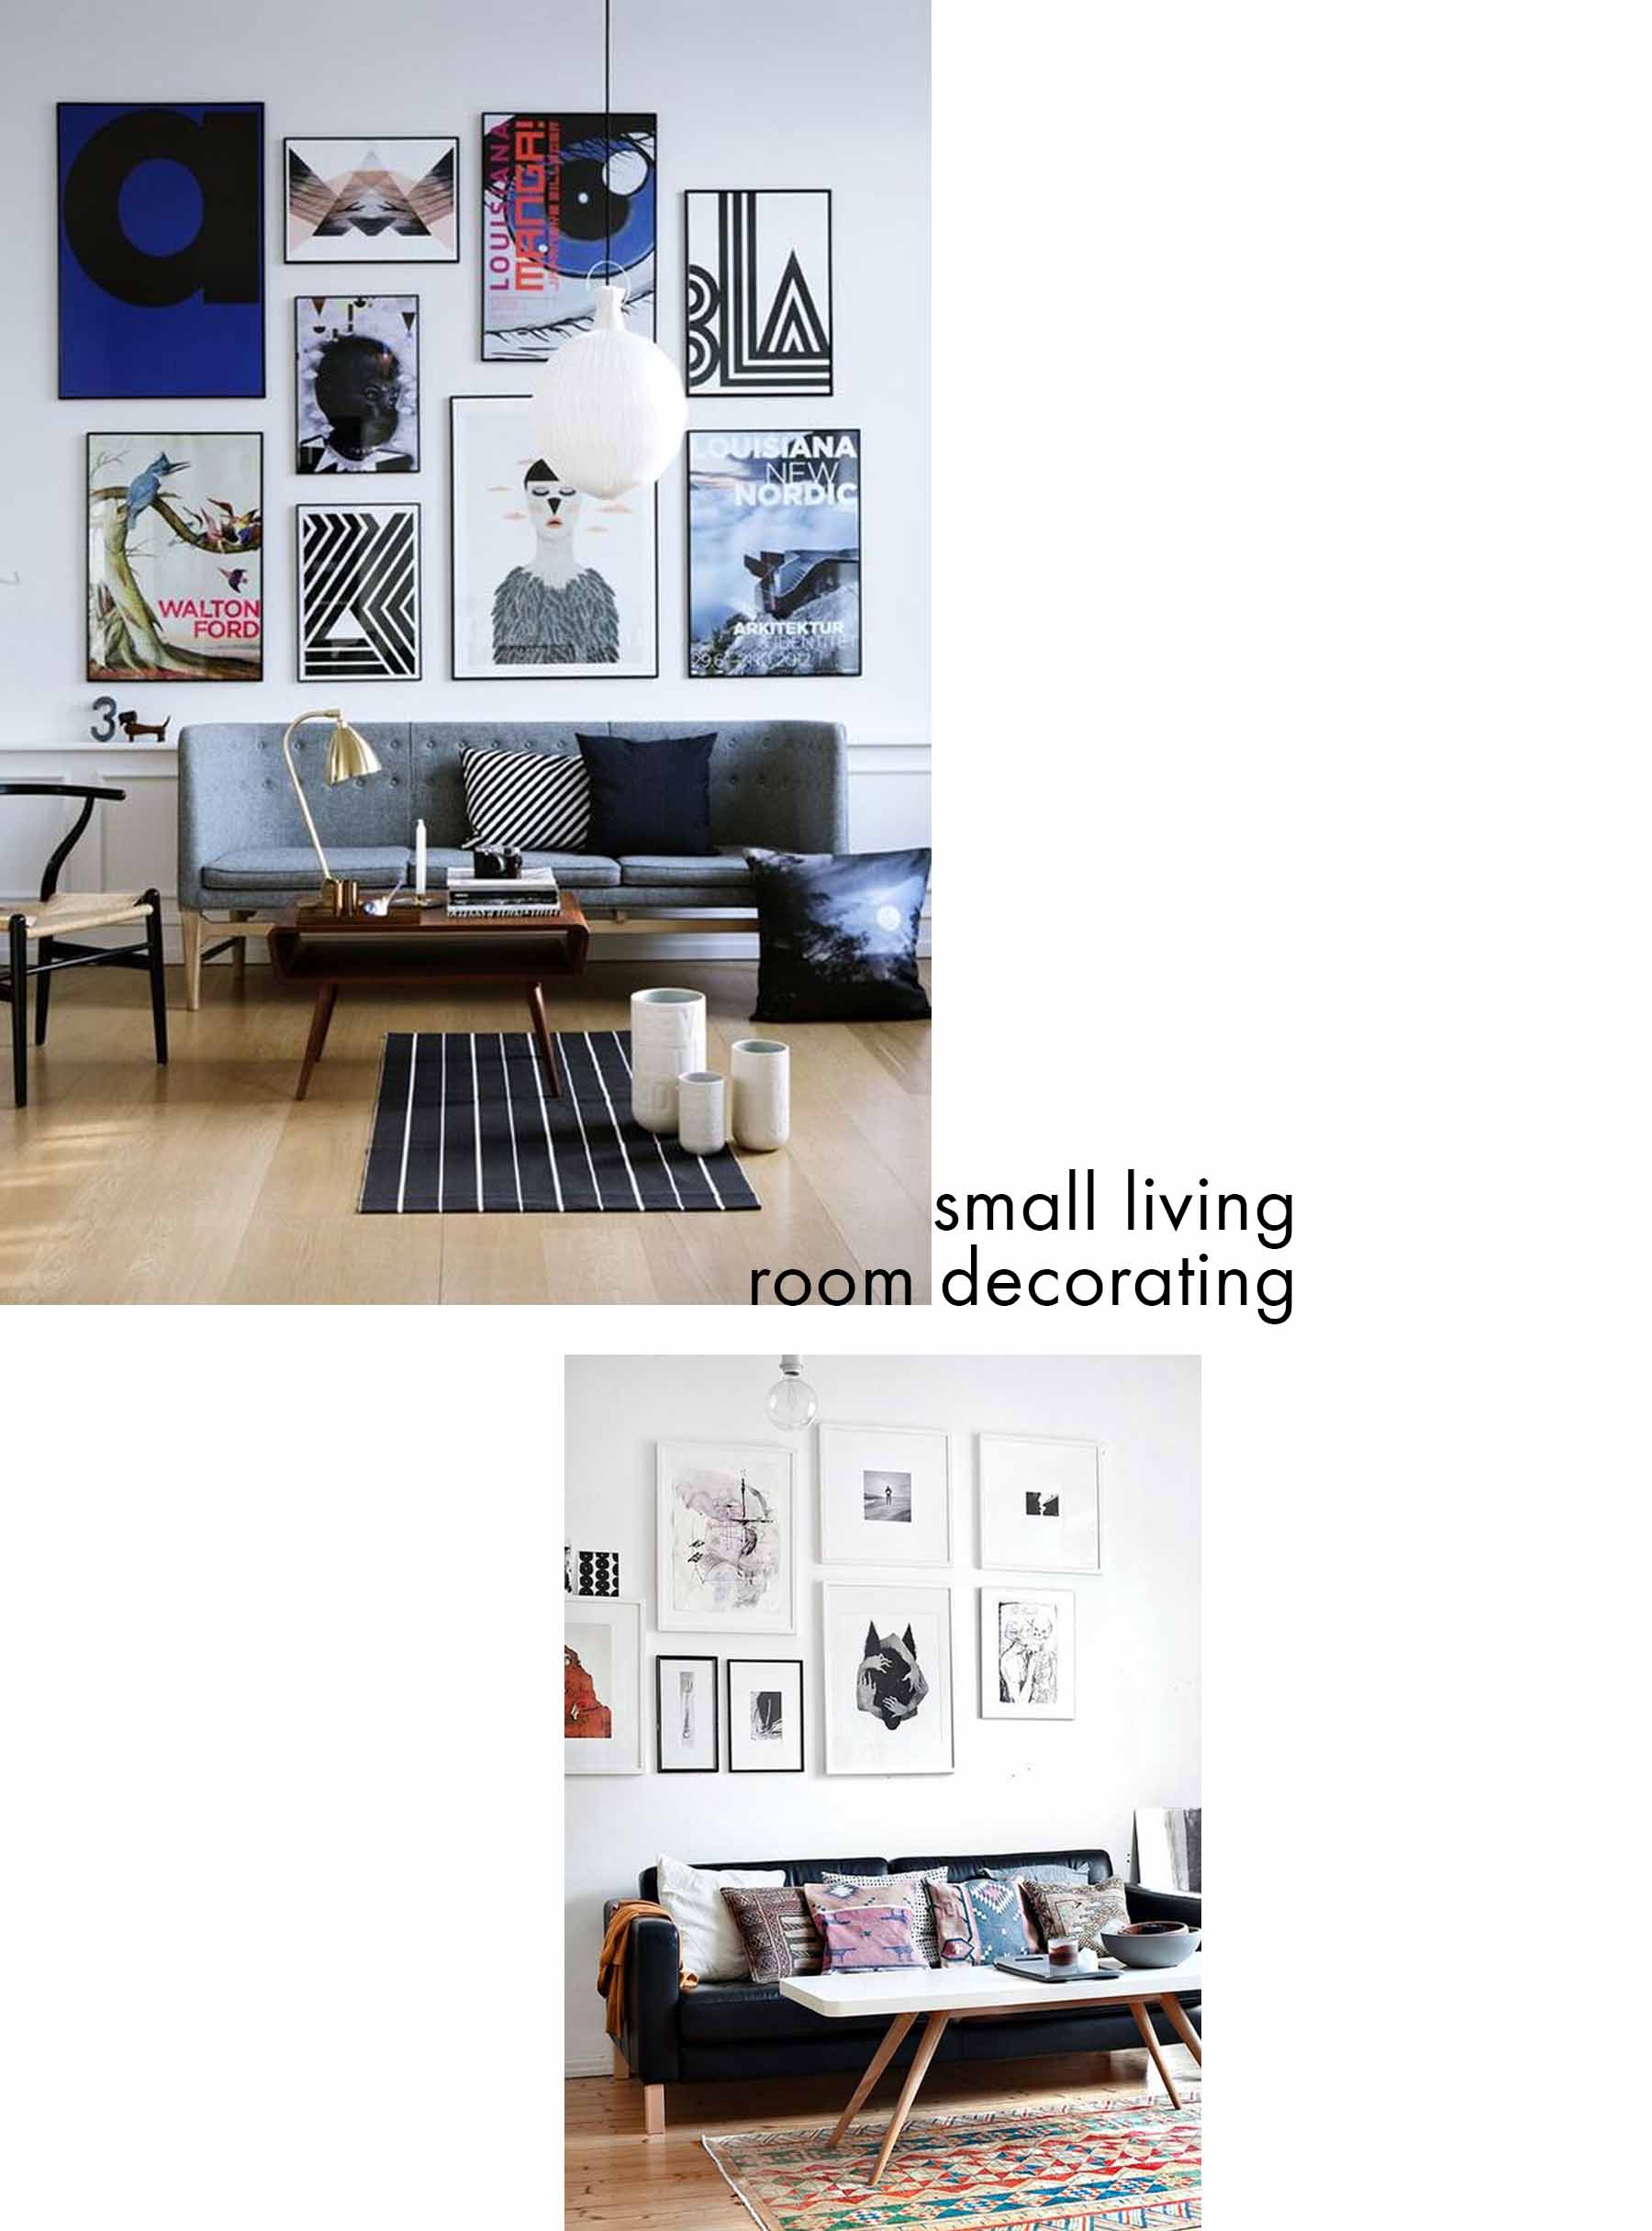 Small Living Room - Decorating Ideas